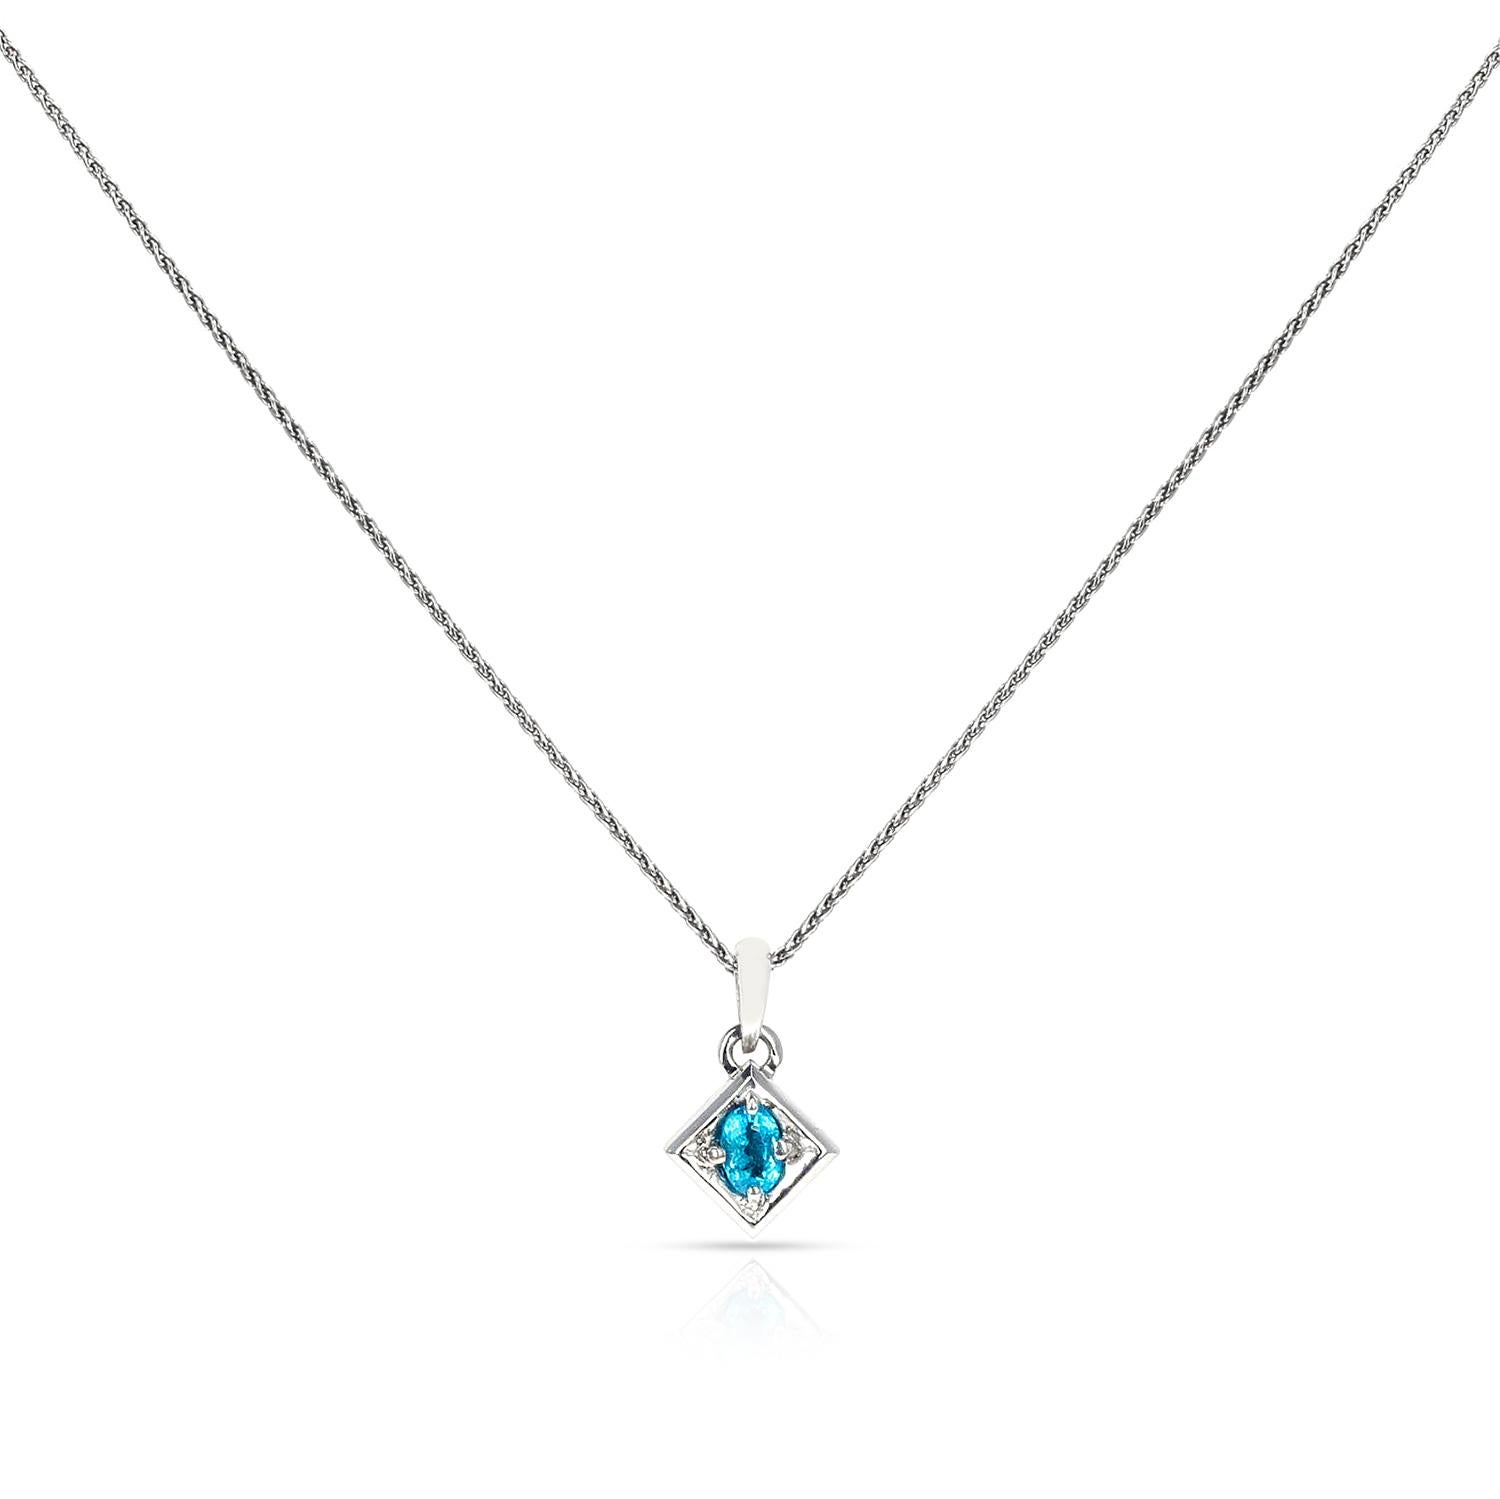 GIA Certified 0.29 ct. Brazilian Paraiba Tourmaline Pendant Necklace In Excellent Condition For Sale In New York, NY